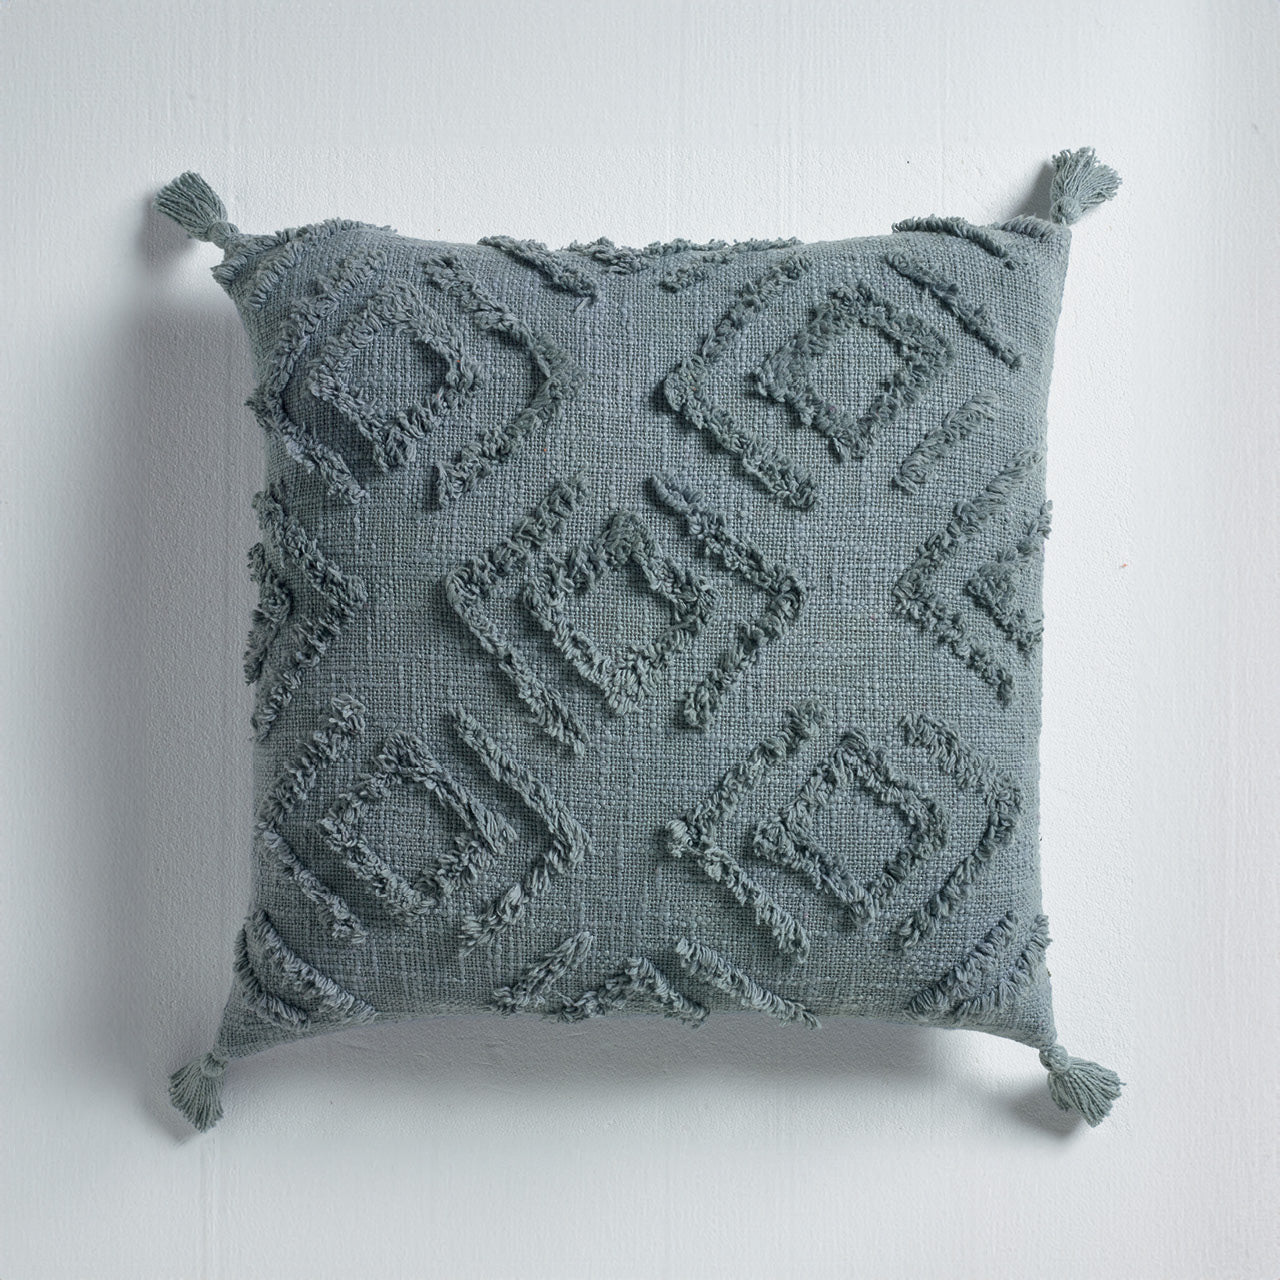 Aspen Cushion Cover Grey on a white background